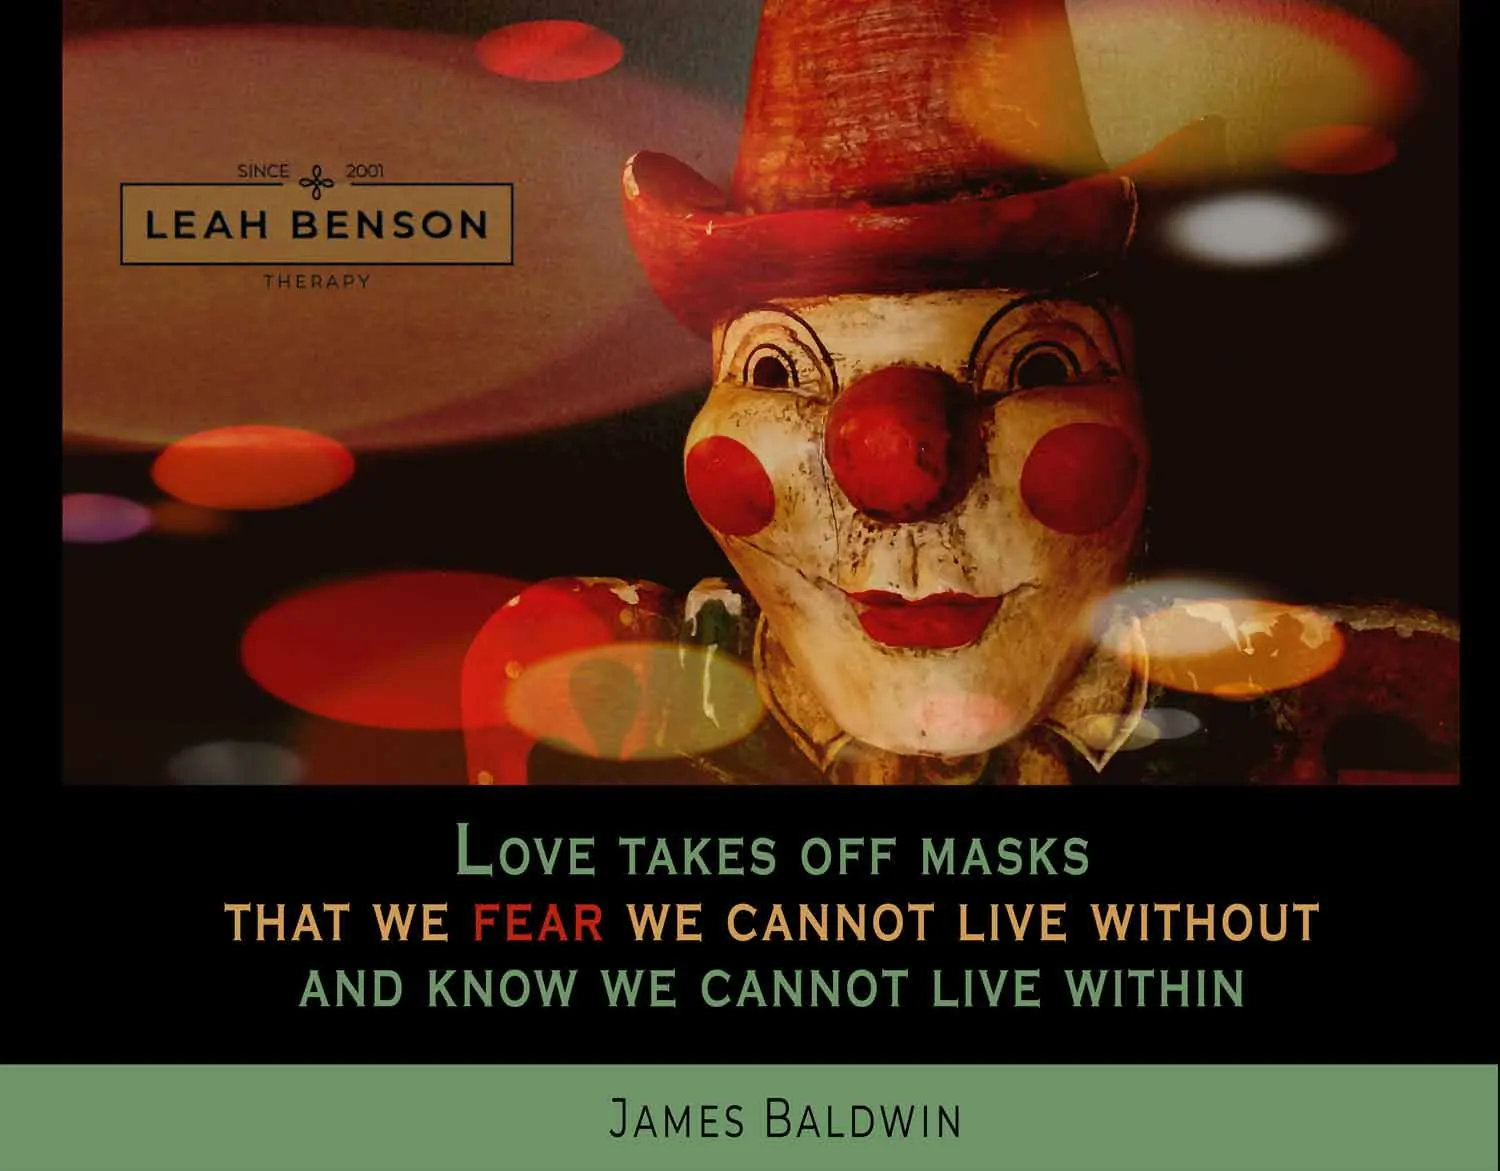 Love takes off masks that we fear we cannot live without and know we cannot live within. Quote by James Baldwin. Photo of clown mask.